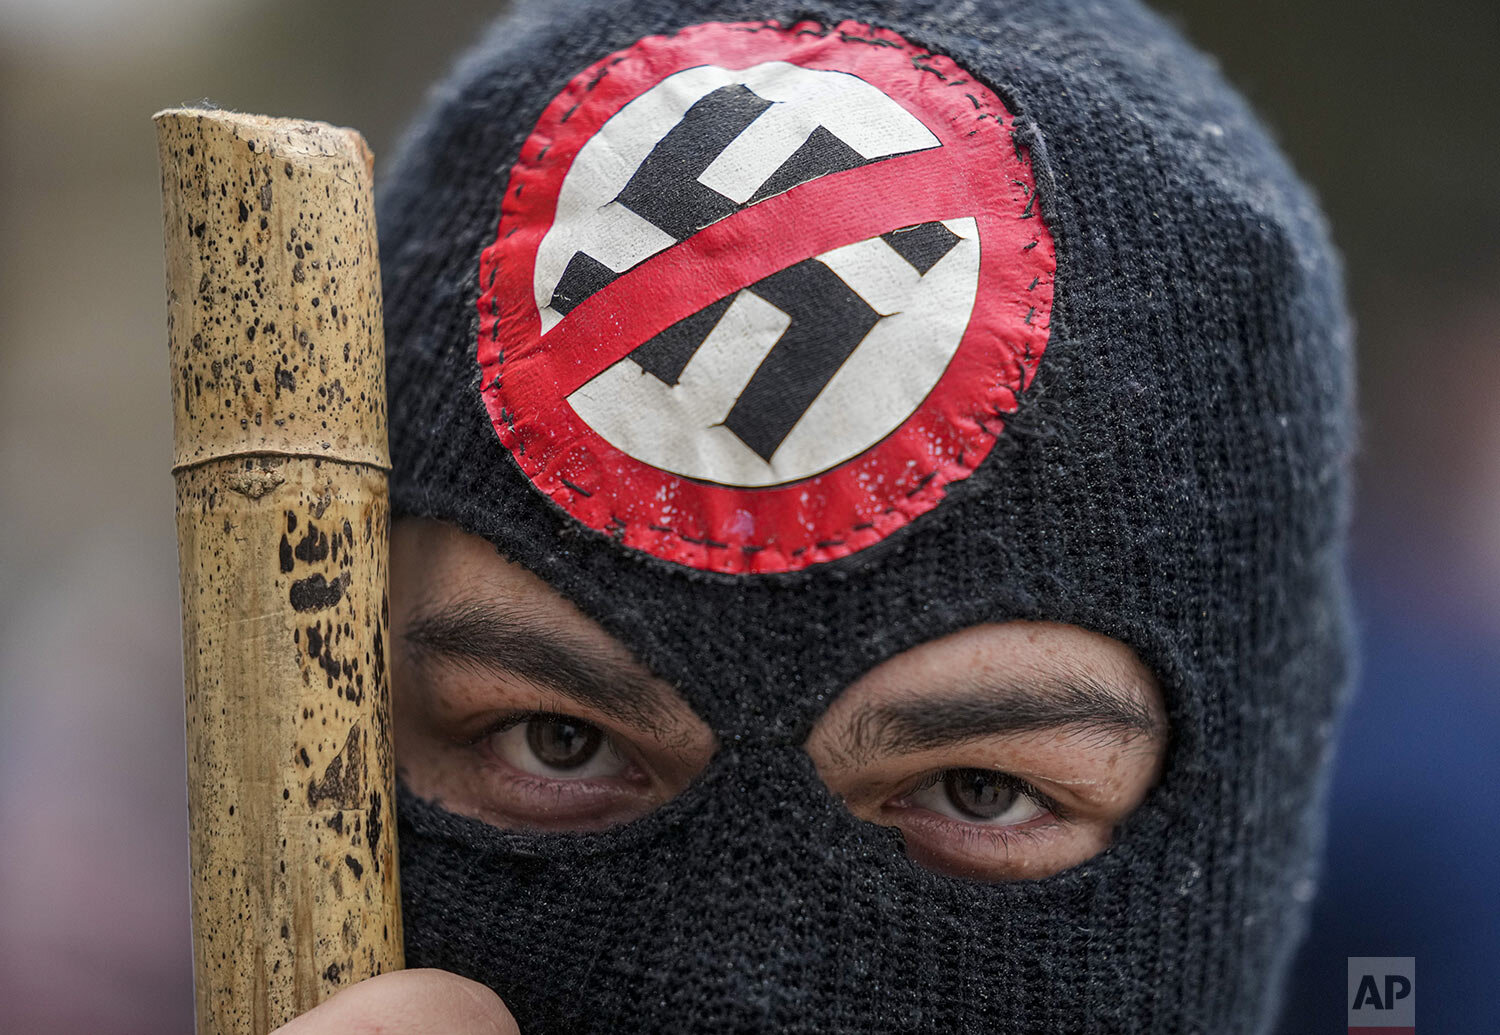  A protester wears an anti-Nazi symbol during protests on the anniversary of the 1973 military coup and the death of President Salvador Allende in Santiago, Chile, Sept. 11, 2021. The coup began the Pinochet dictatorship. (AP Photo/Esteban Felix) 